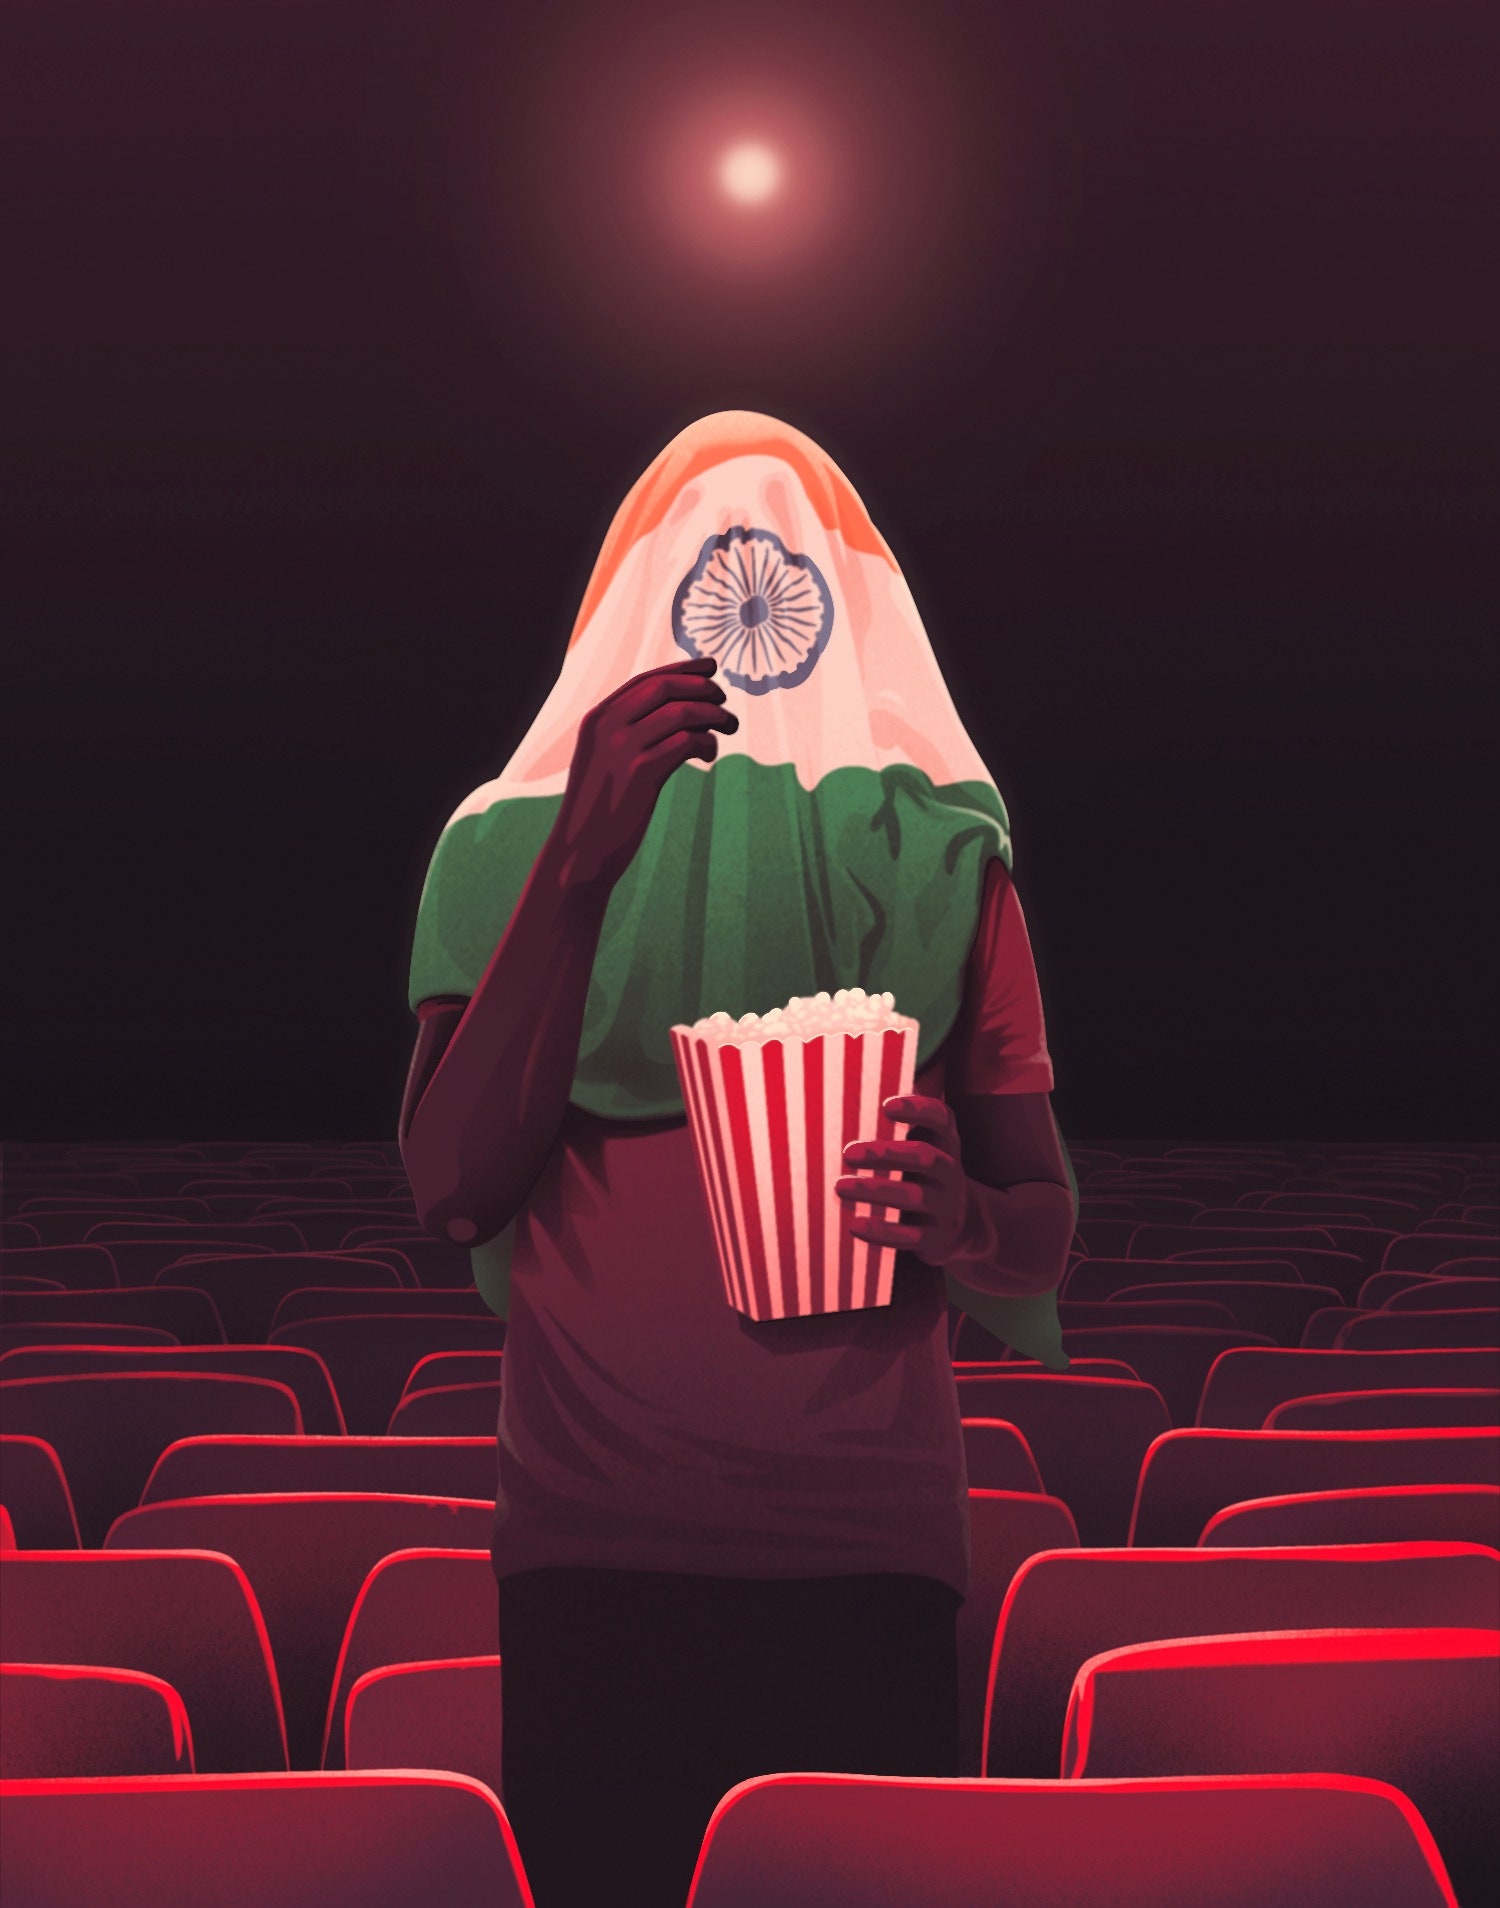 An illustration of a person standing in a darkened movie theater holding popcorn, with the Indian flag covering their face. 